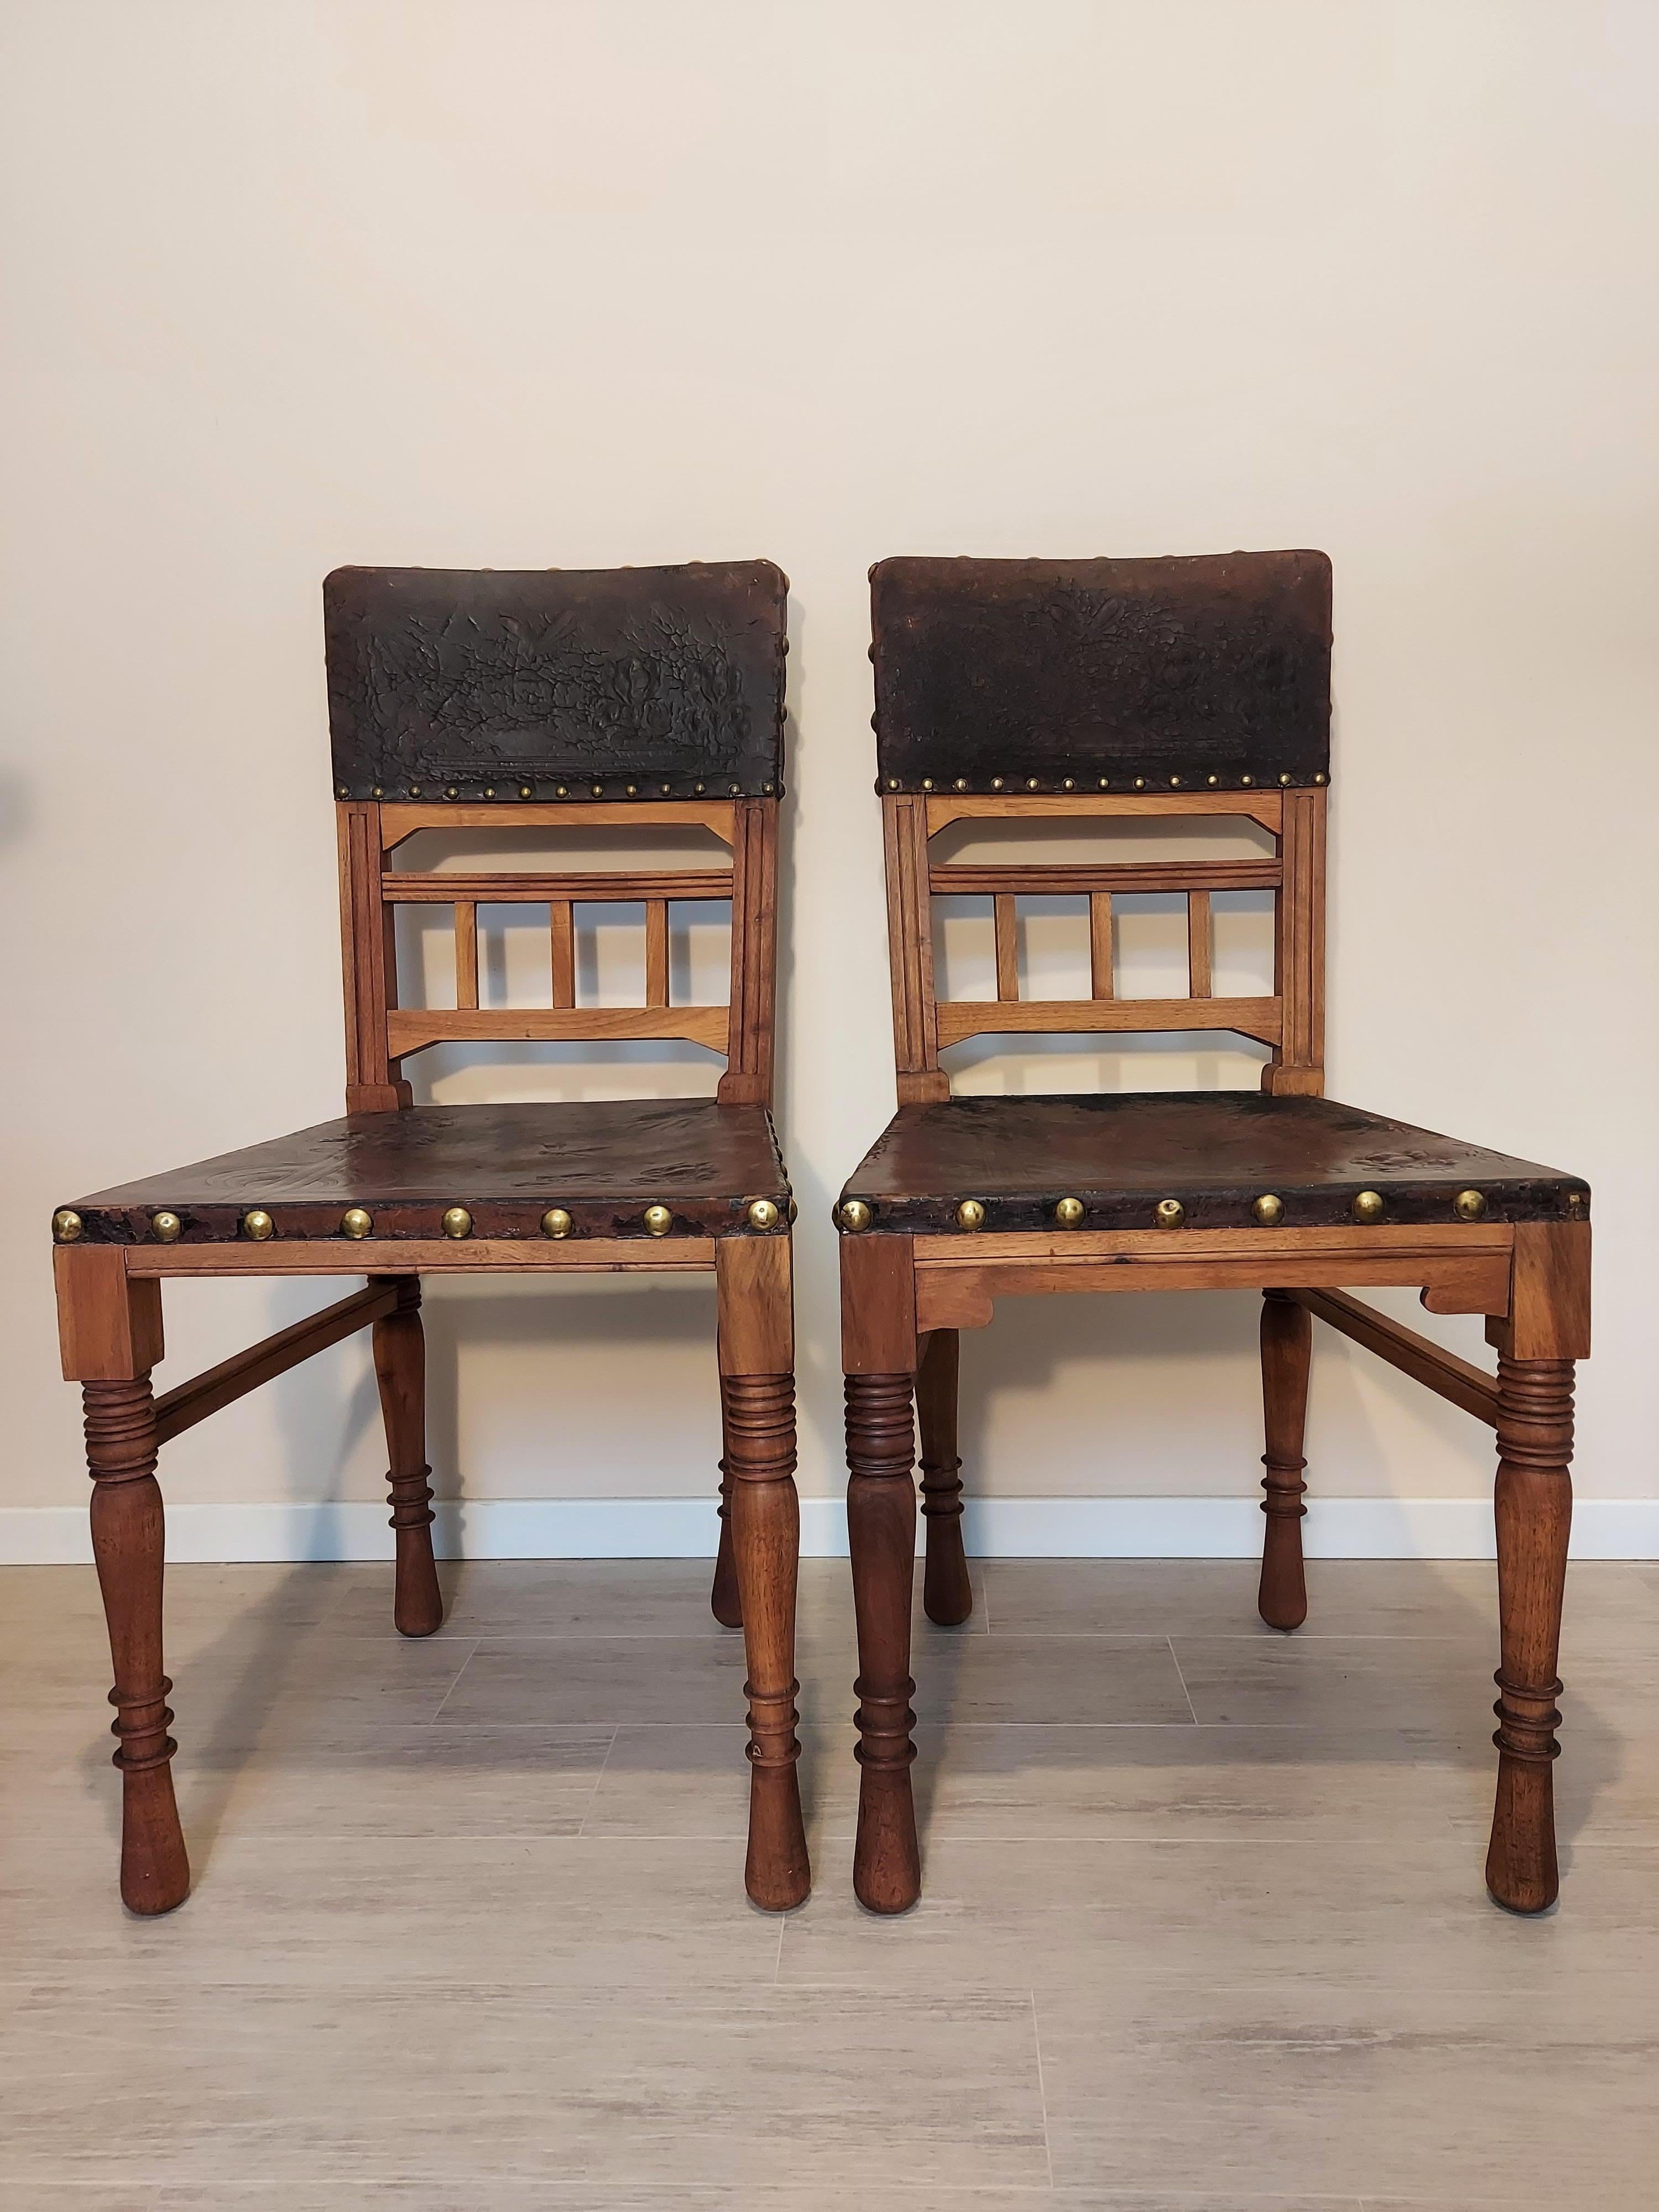 Antique castle chairs 1920s

Period: 1920

Material: Leather, Oak

Condition: Leather and Wood treated with oil and wax.